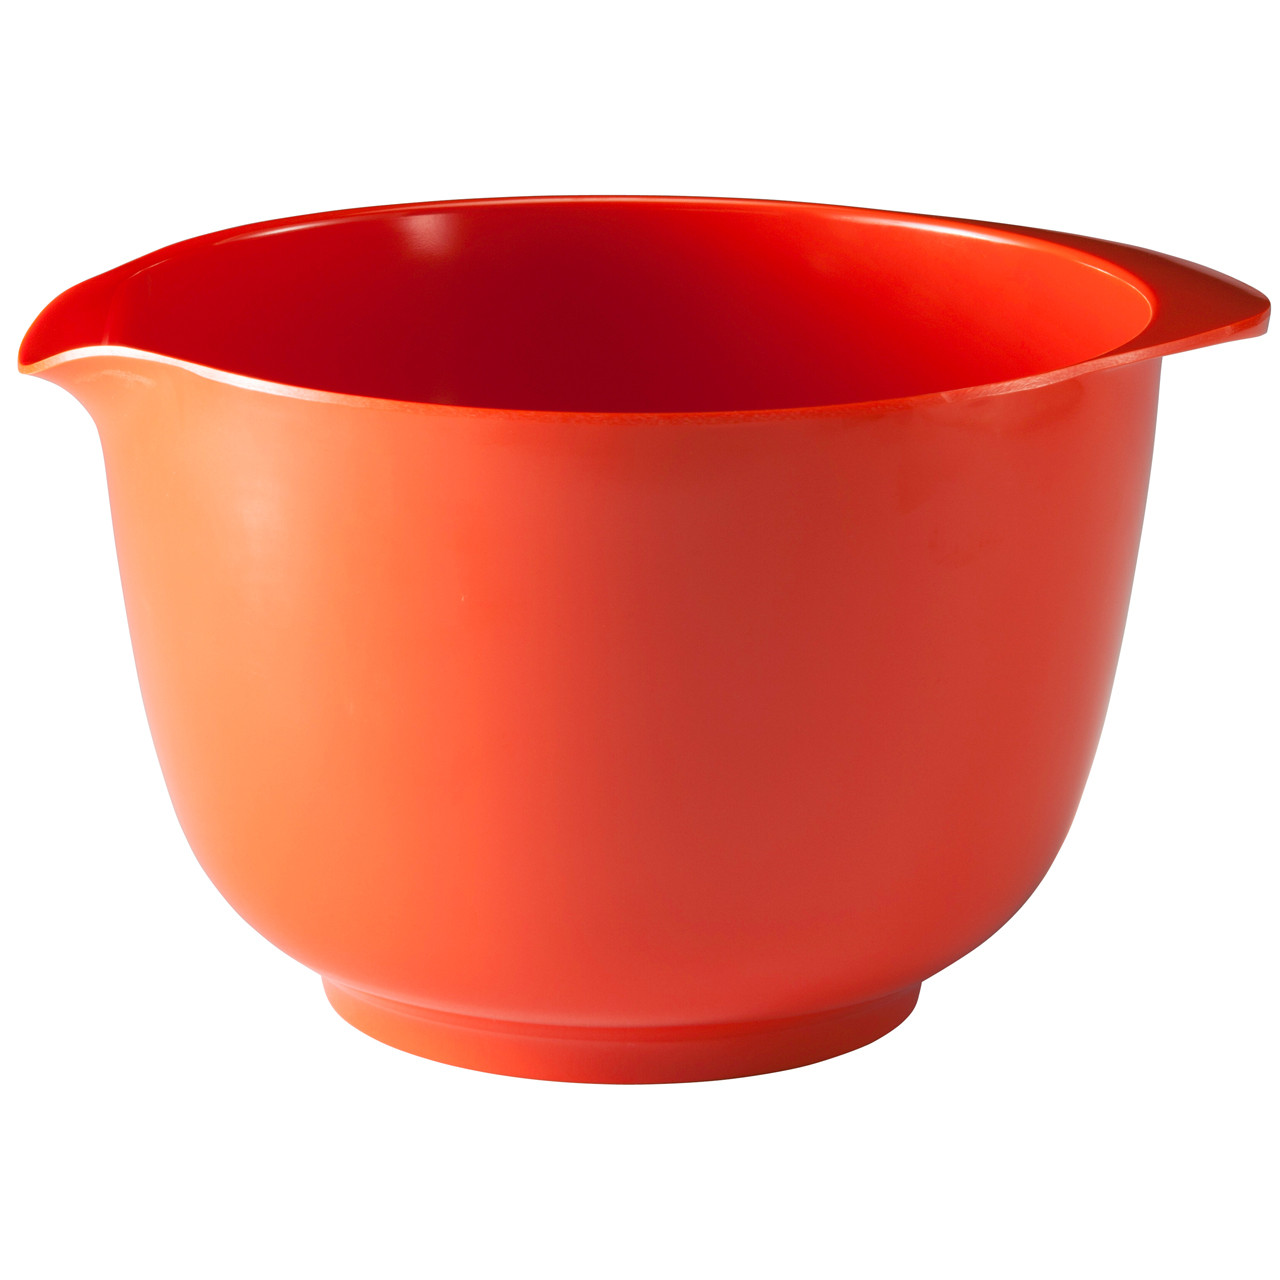 Hutzler 2, 3, and 4 l Melamine Mixing Bowl Set in Holiday Colors